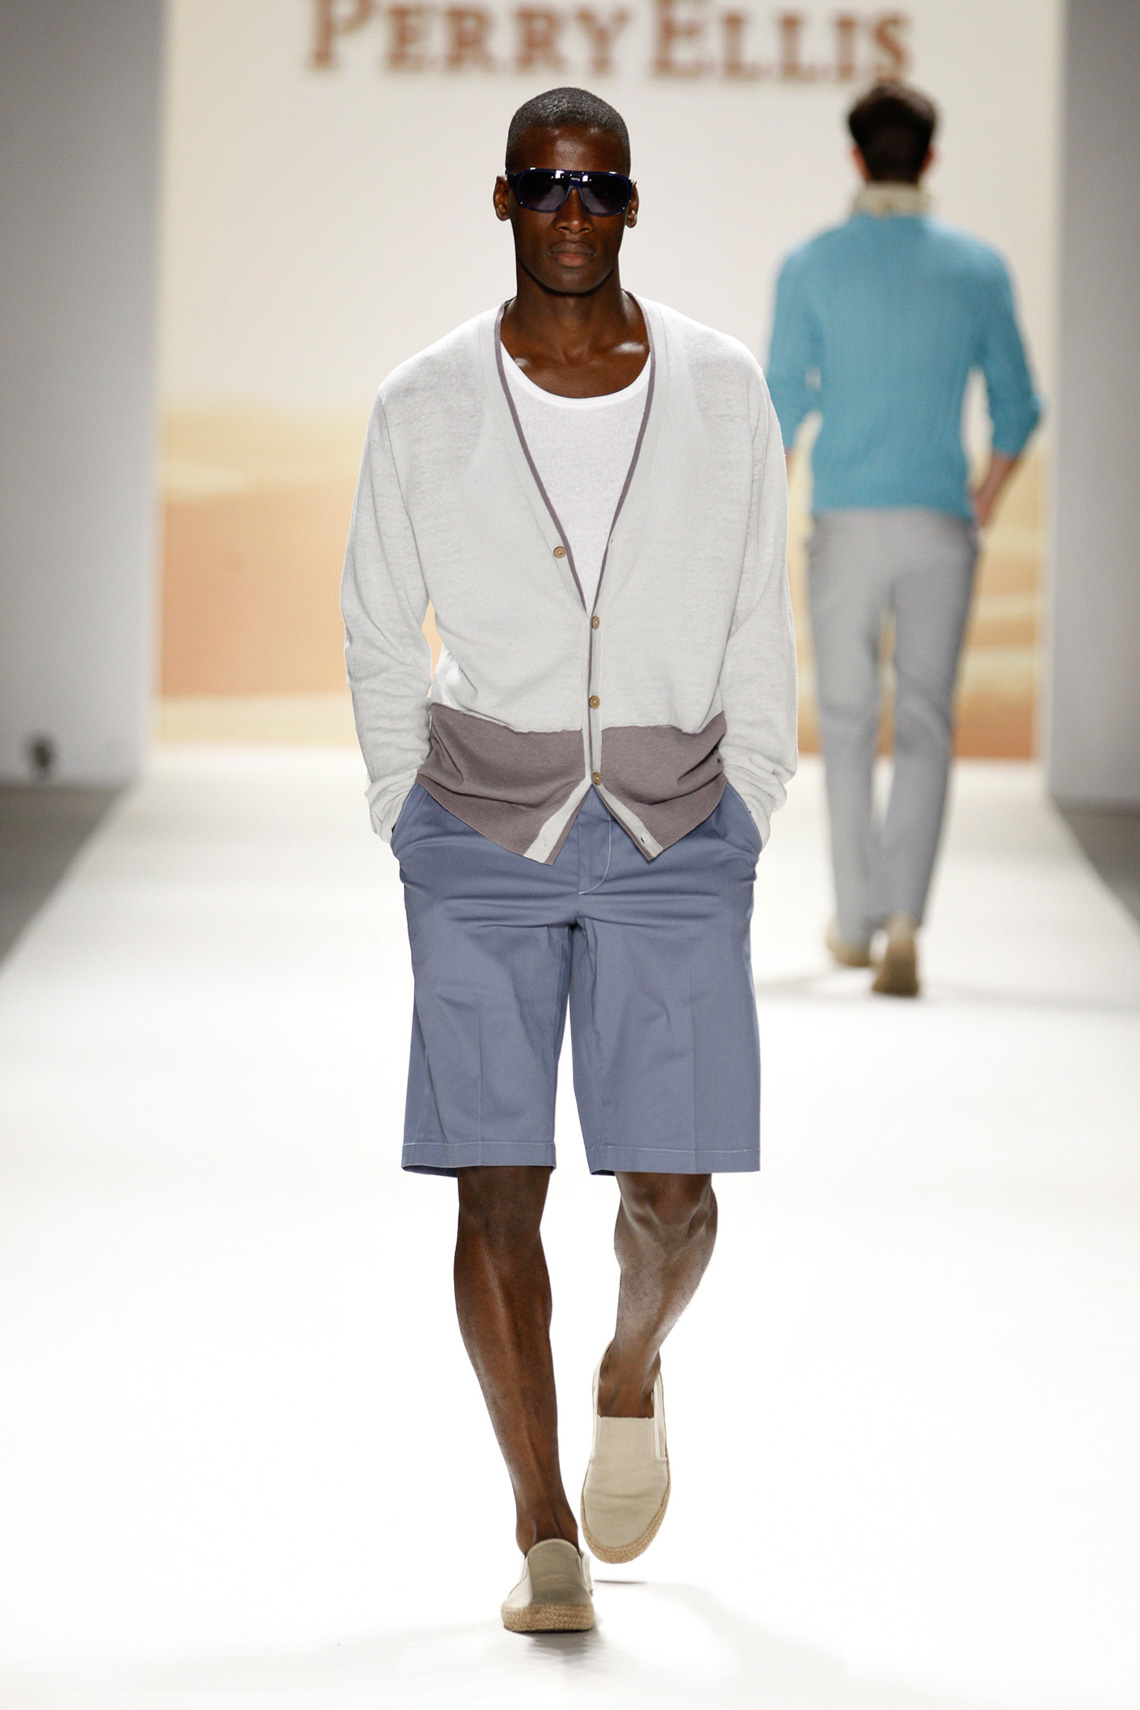 Perry Ellis SS2012 Collection